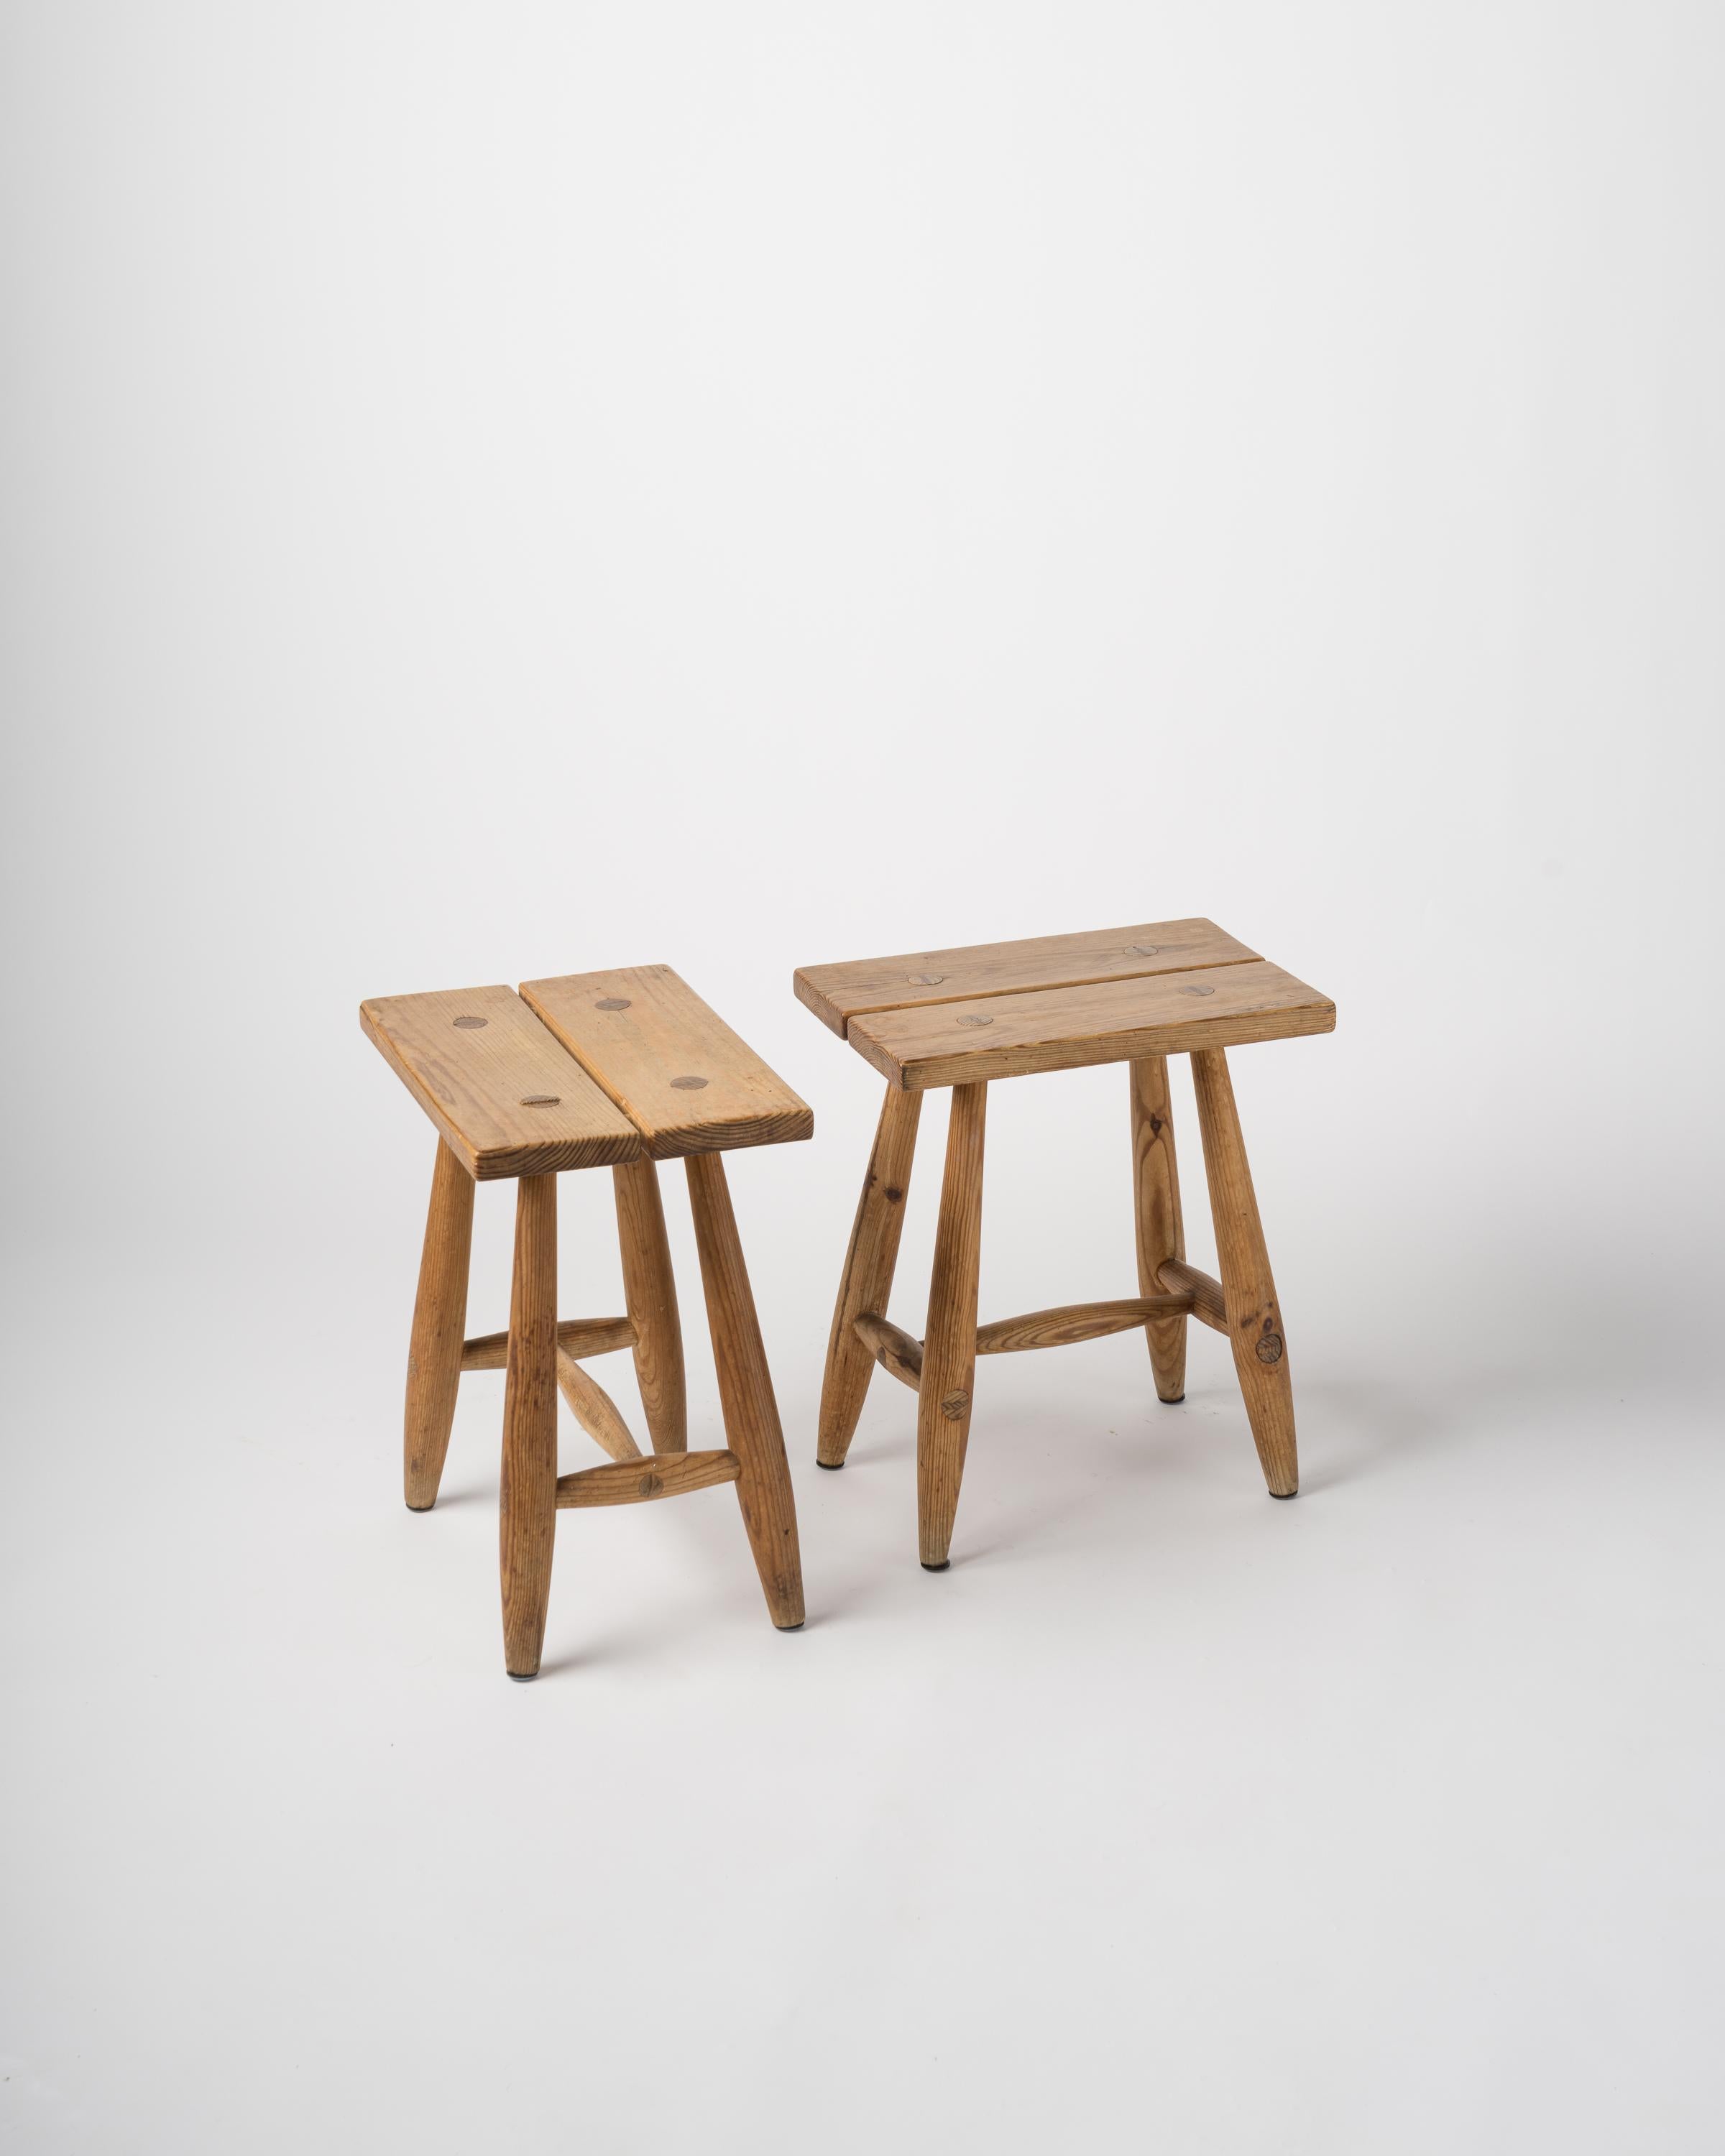 French Pair of Minimalist Pinewood Stools, France, 1970s For Sale